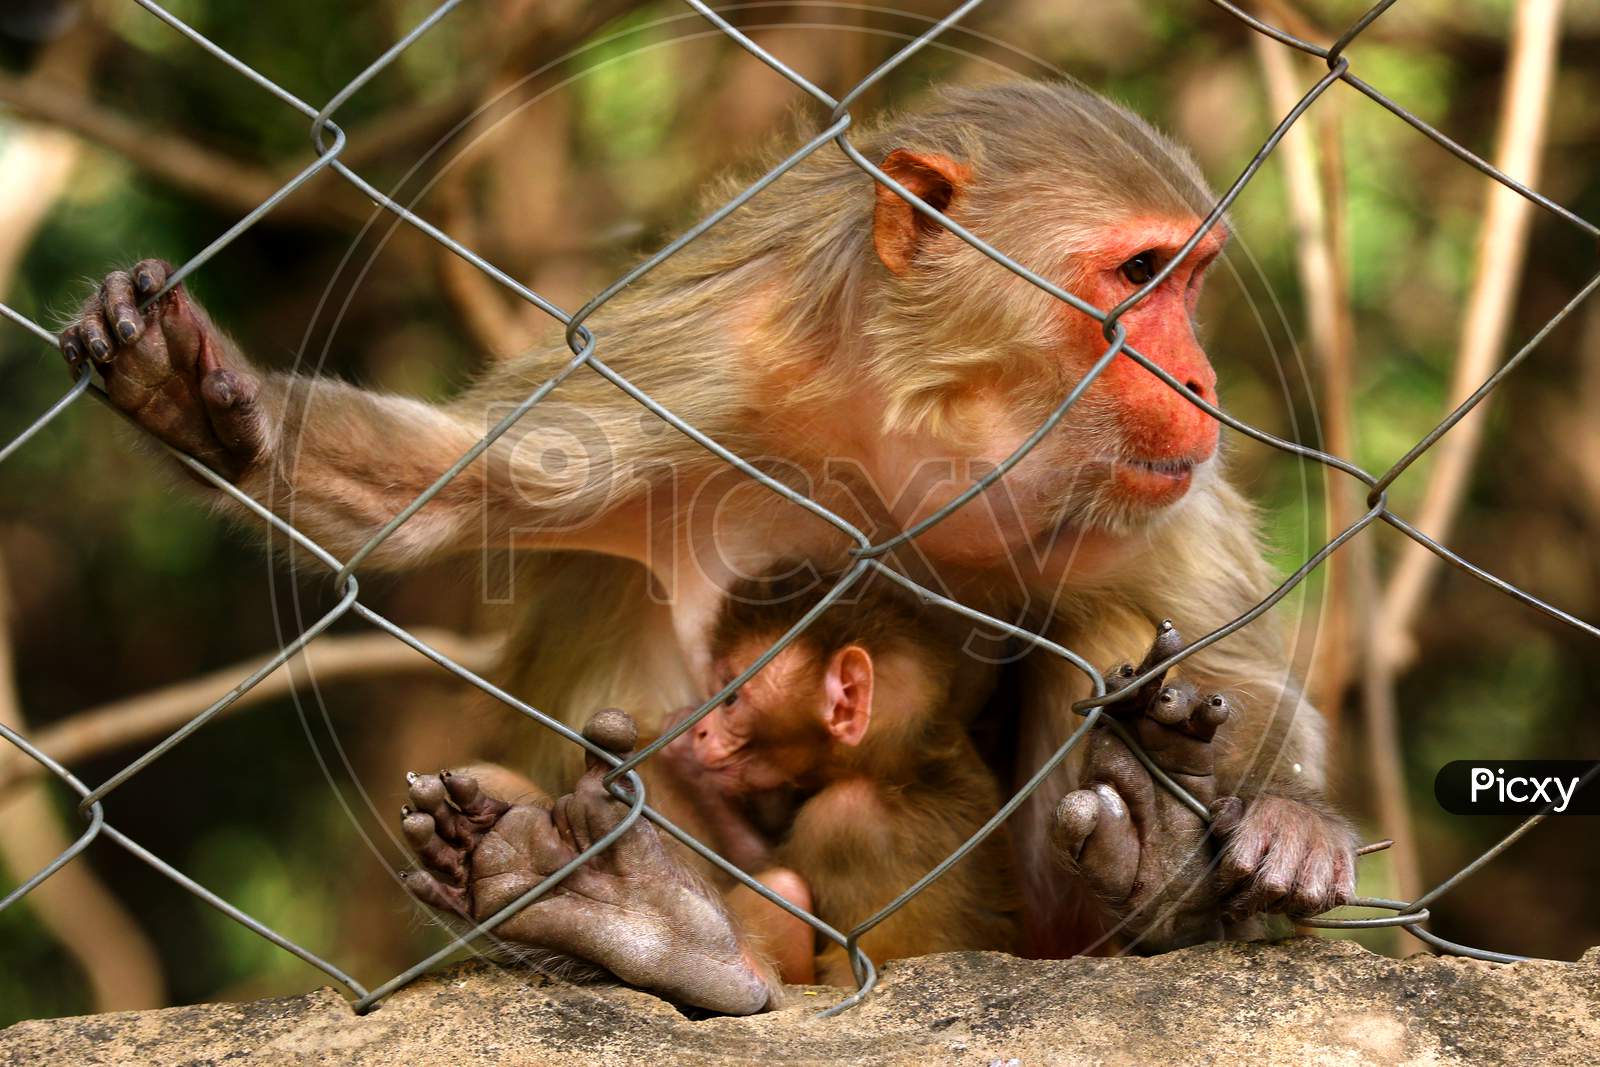  A female macaque and her baby on the eve of Mother's Day in Pushkar, Rajasthan, India on 09 May 2020.